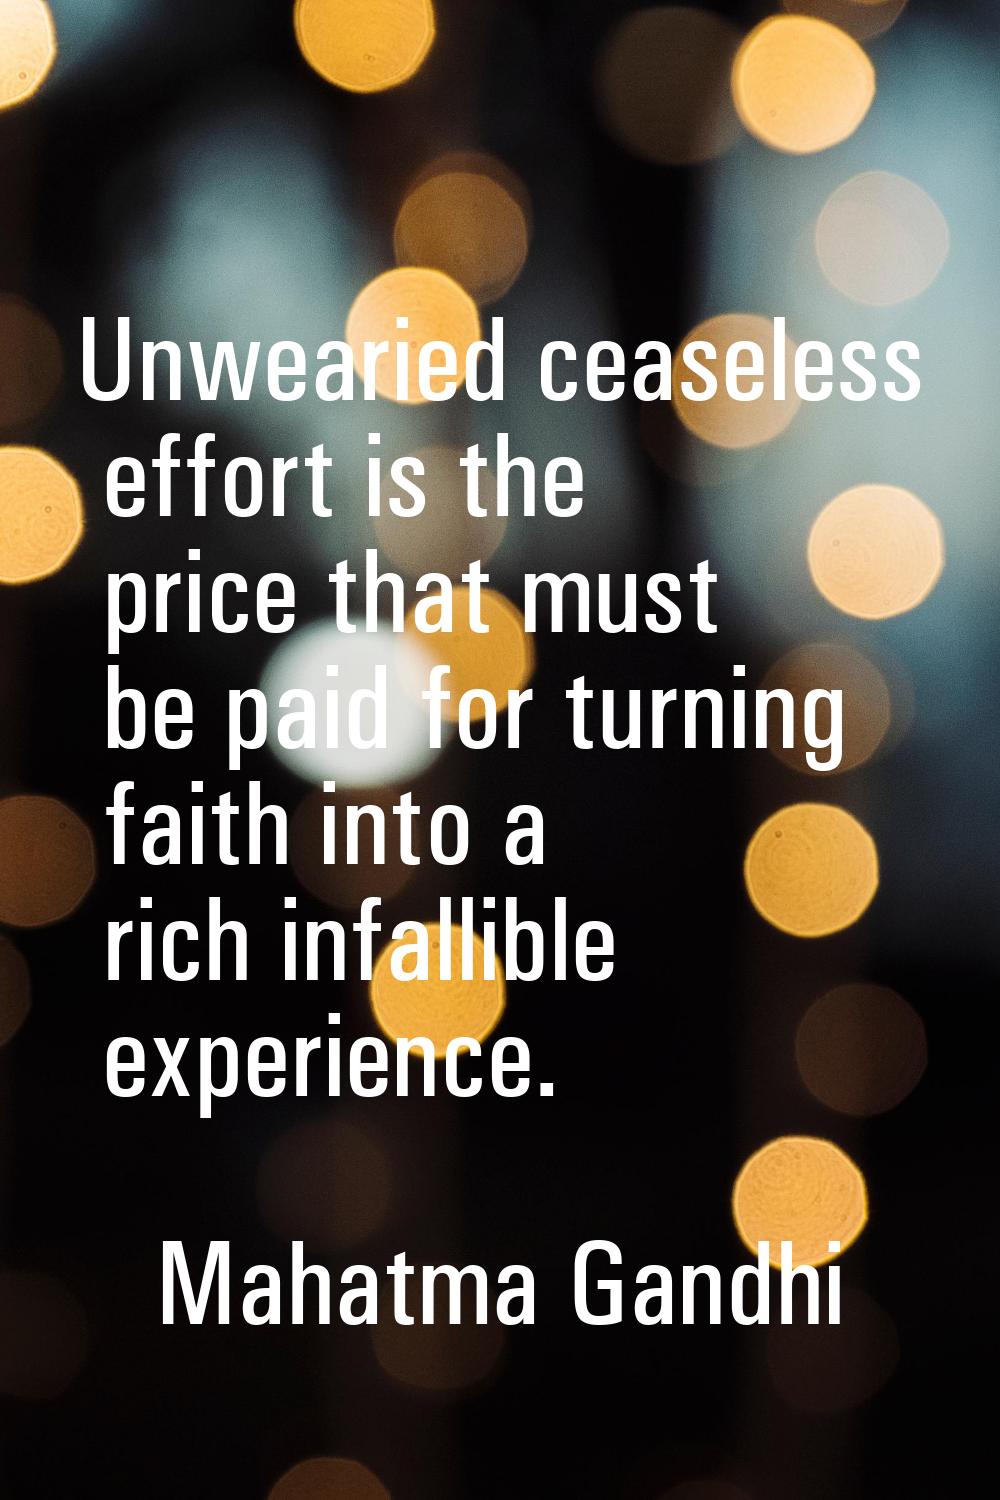 Unwearied ceaseless effort is the price that must be paid for turning faith into a rich infallible 